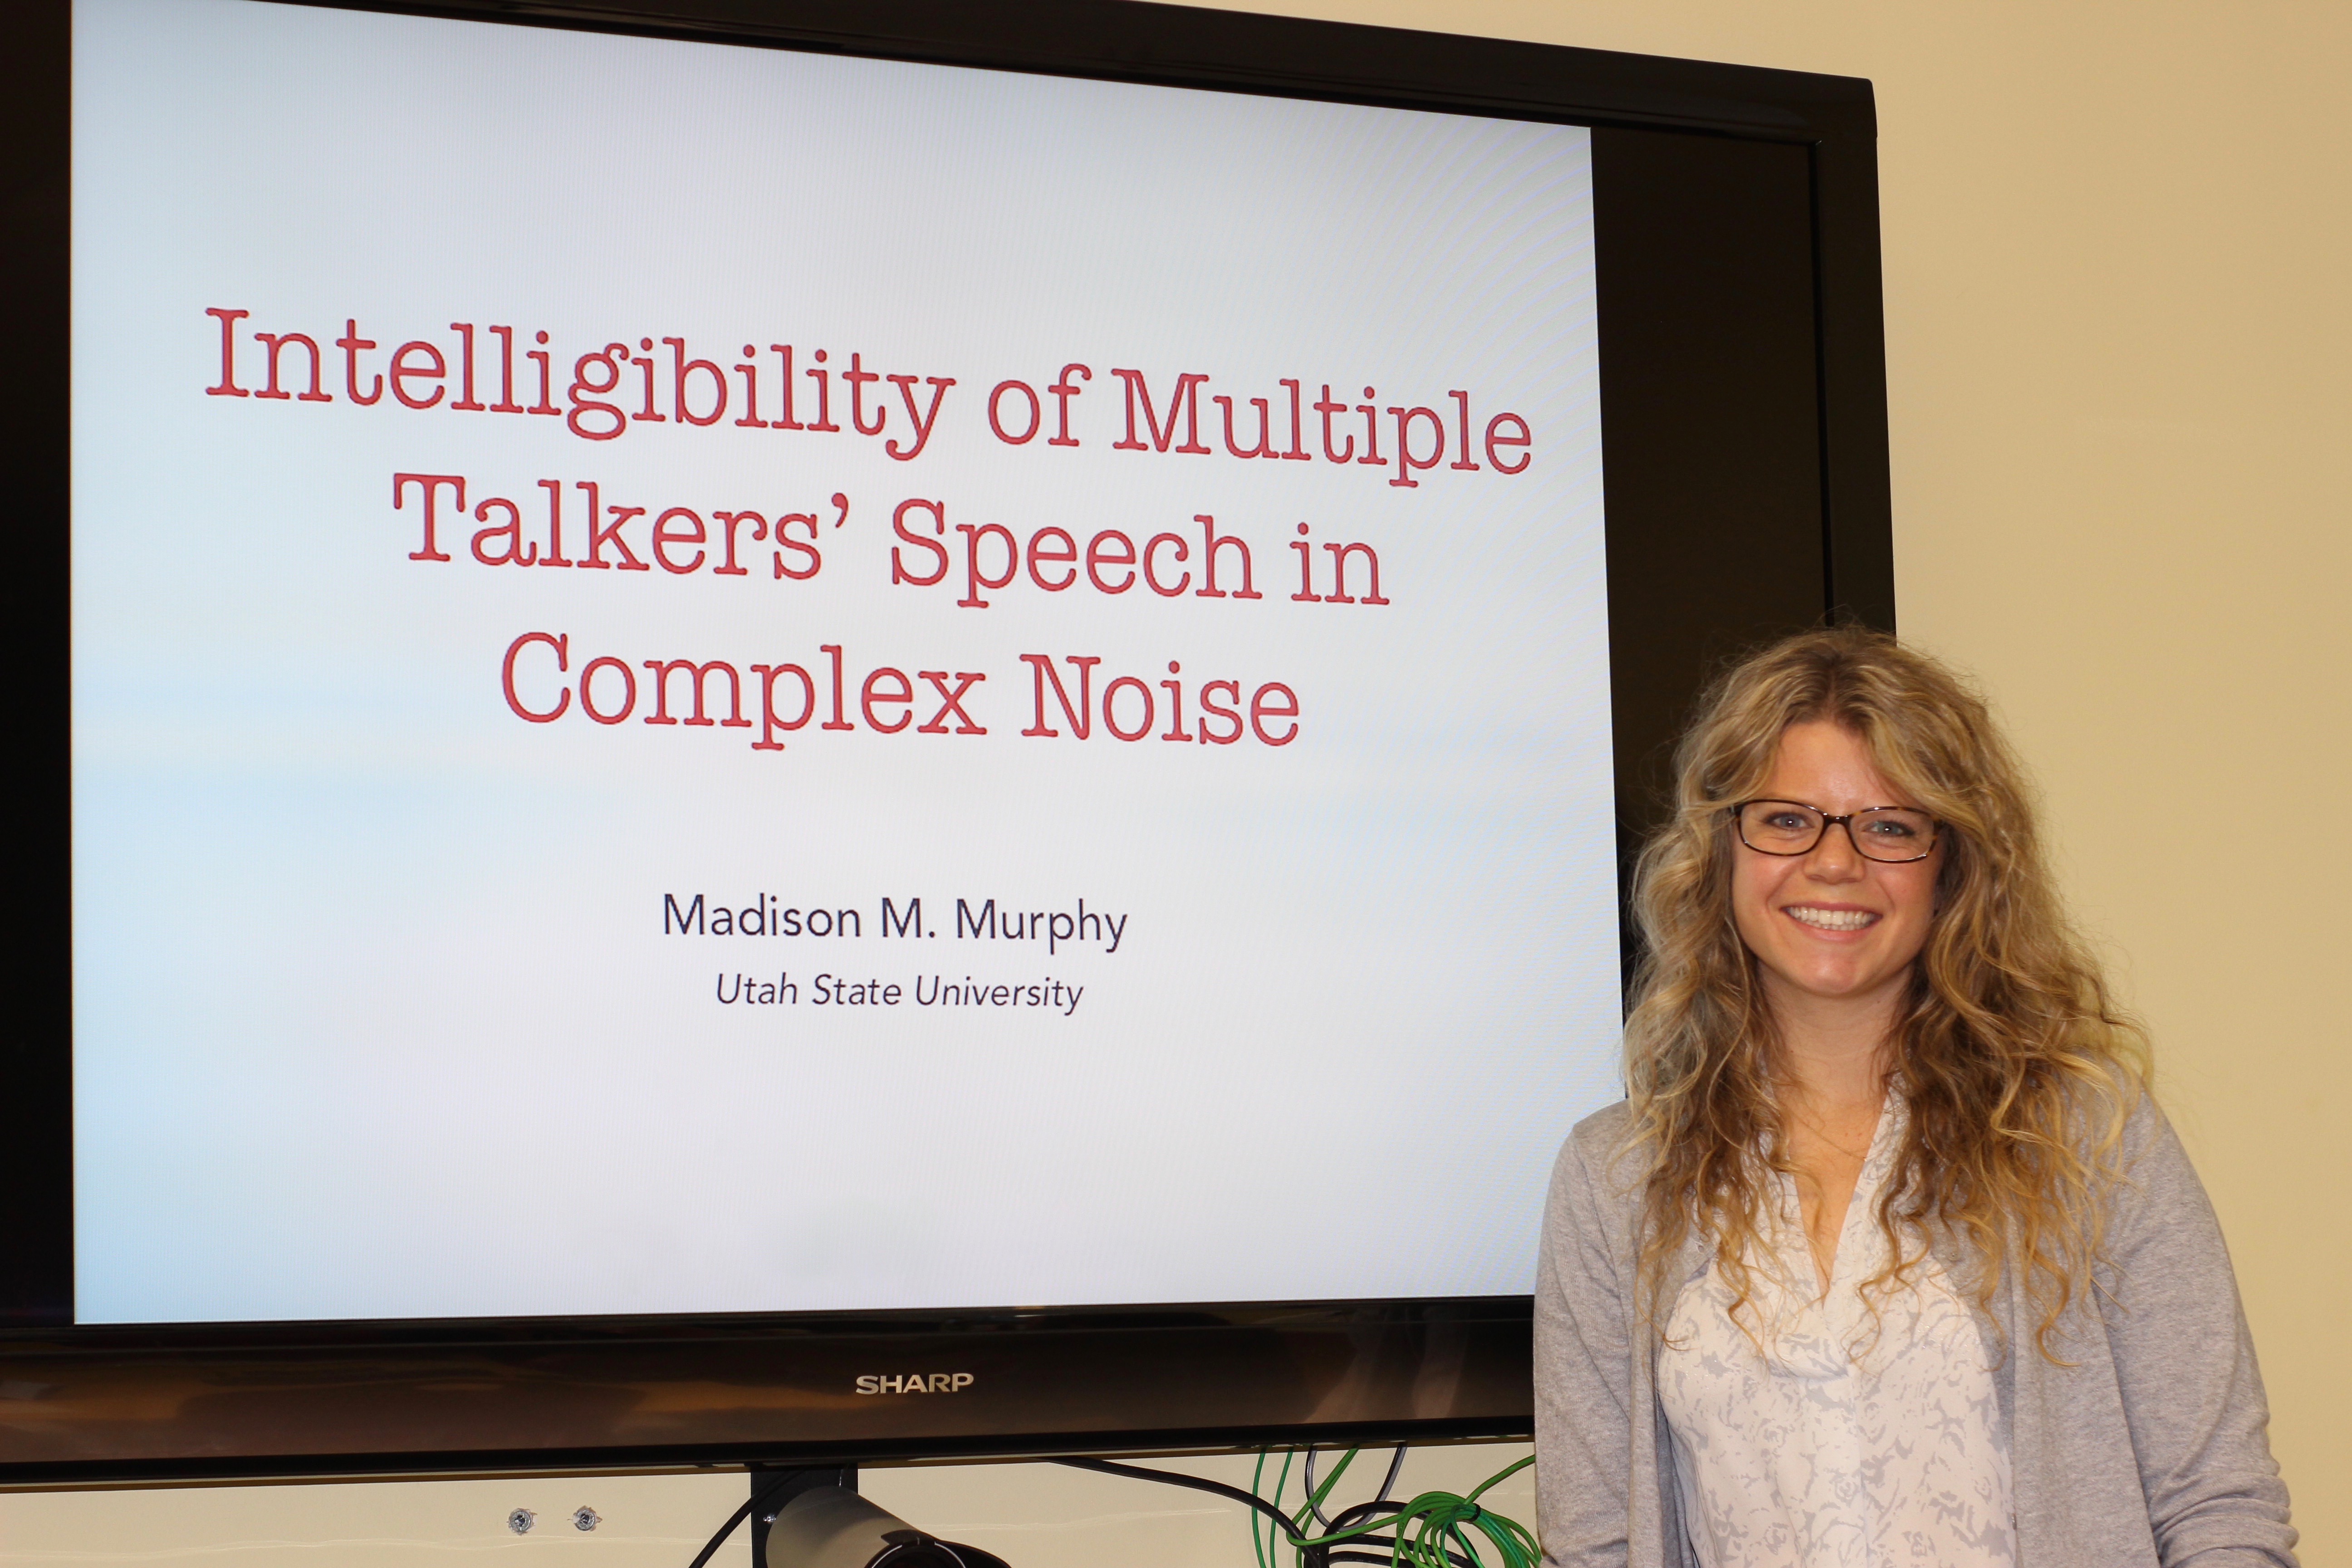 white, woman with glasses and long blonde hair standing in front of a large monitor that reads, "Intelligibility of multiple talkers' speech in complex noise. Madison M. Murphy, Utah State University".